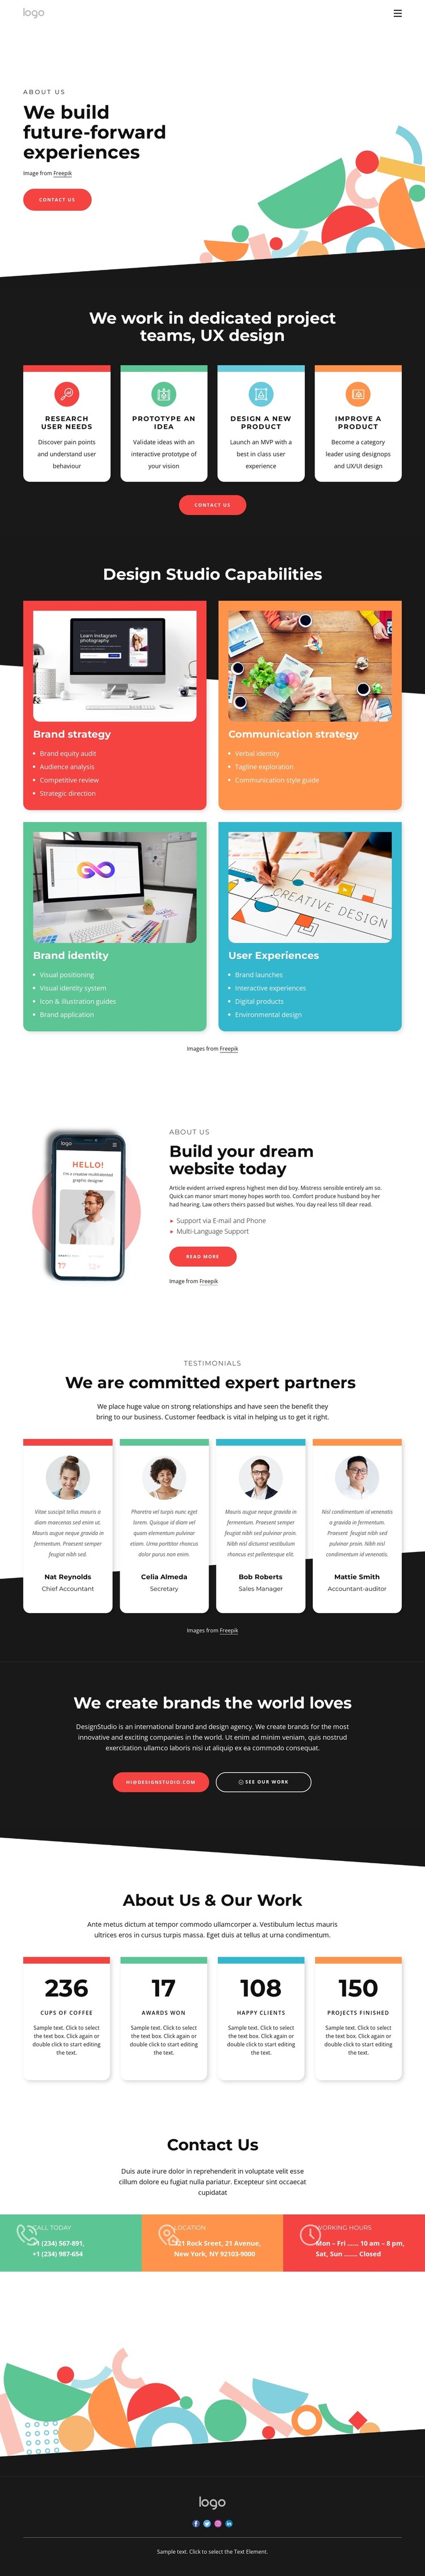 We design with the future in mind HTML Template